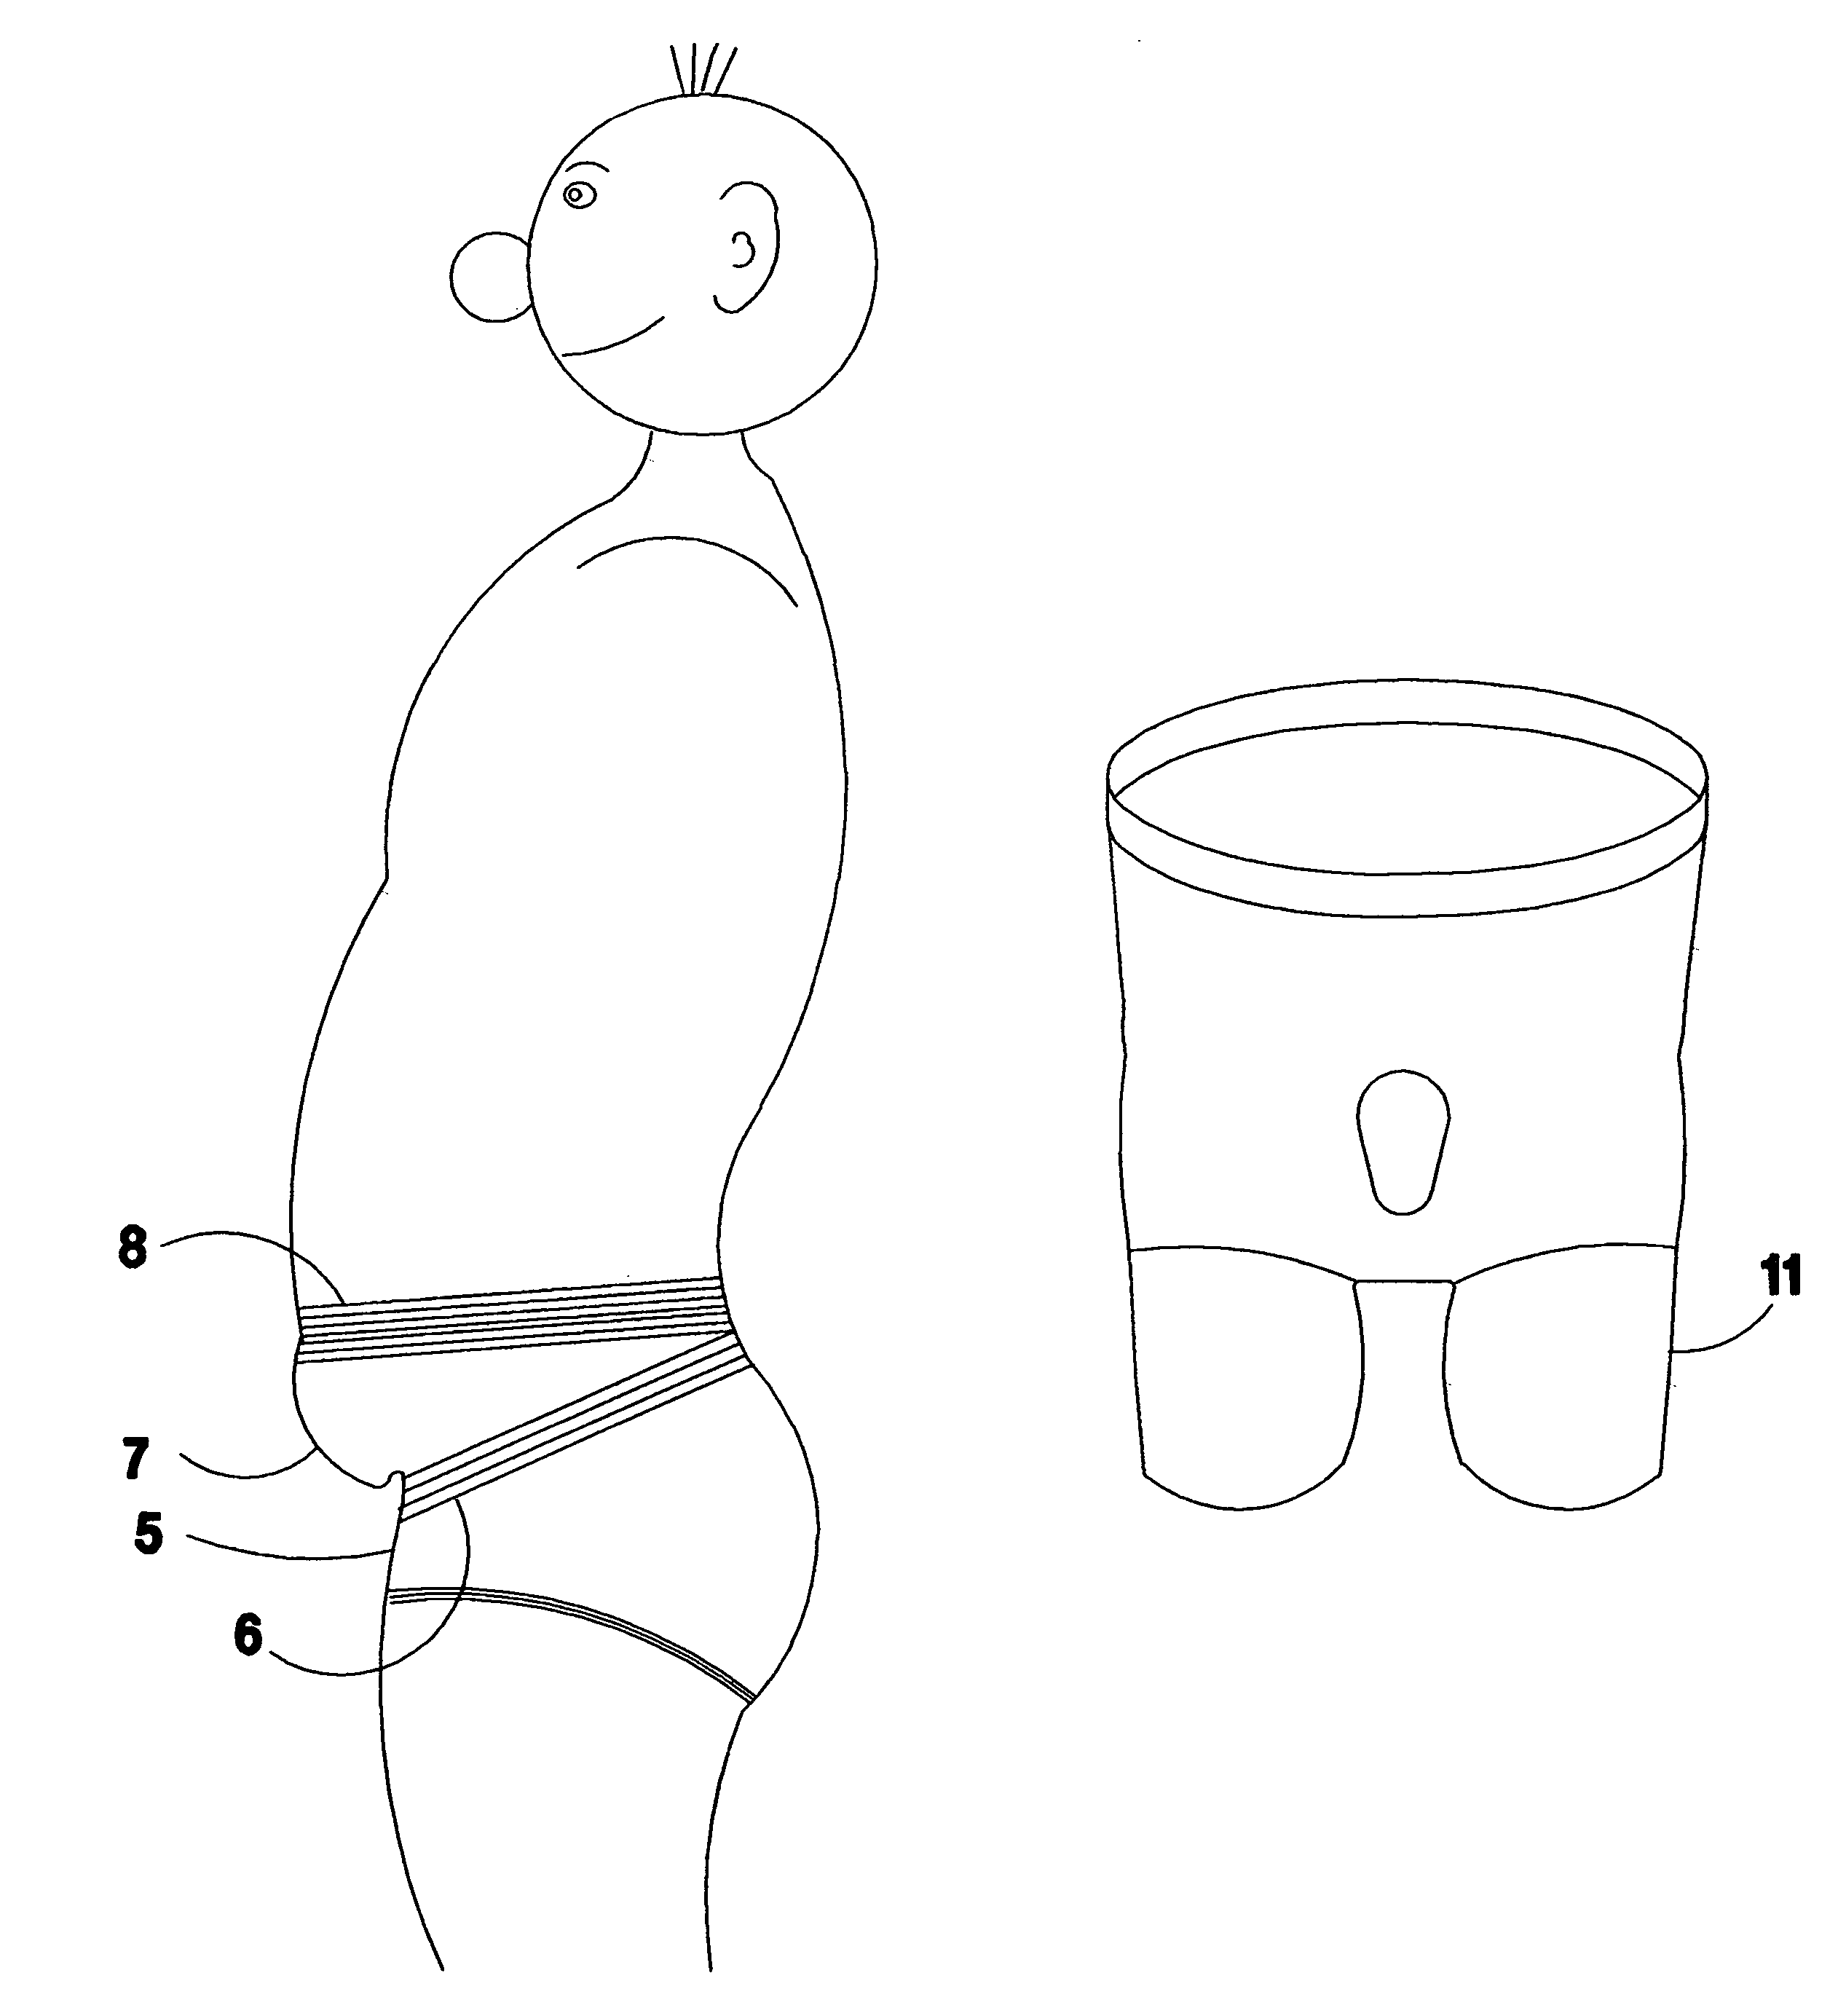 Undergarment for hernia relief and other purposes